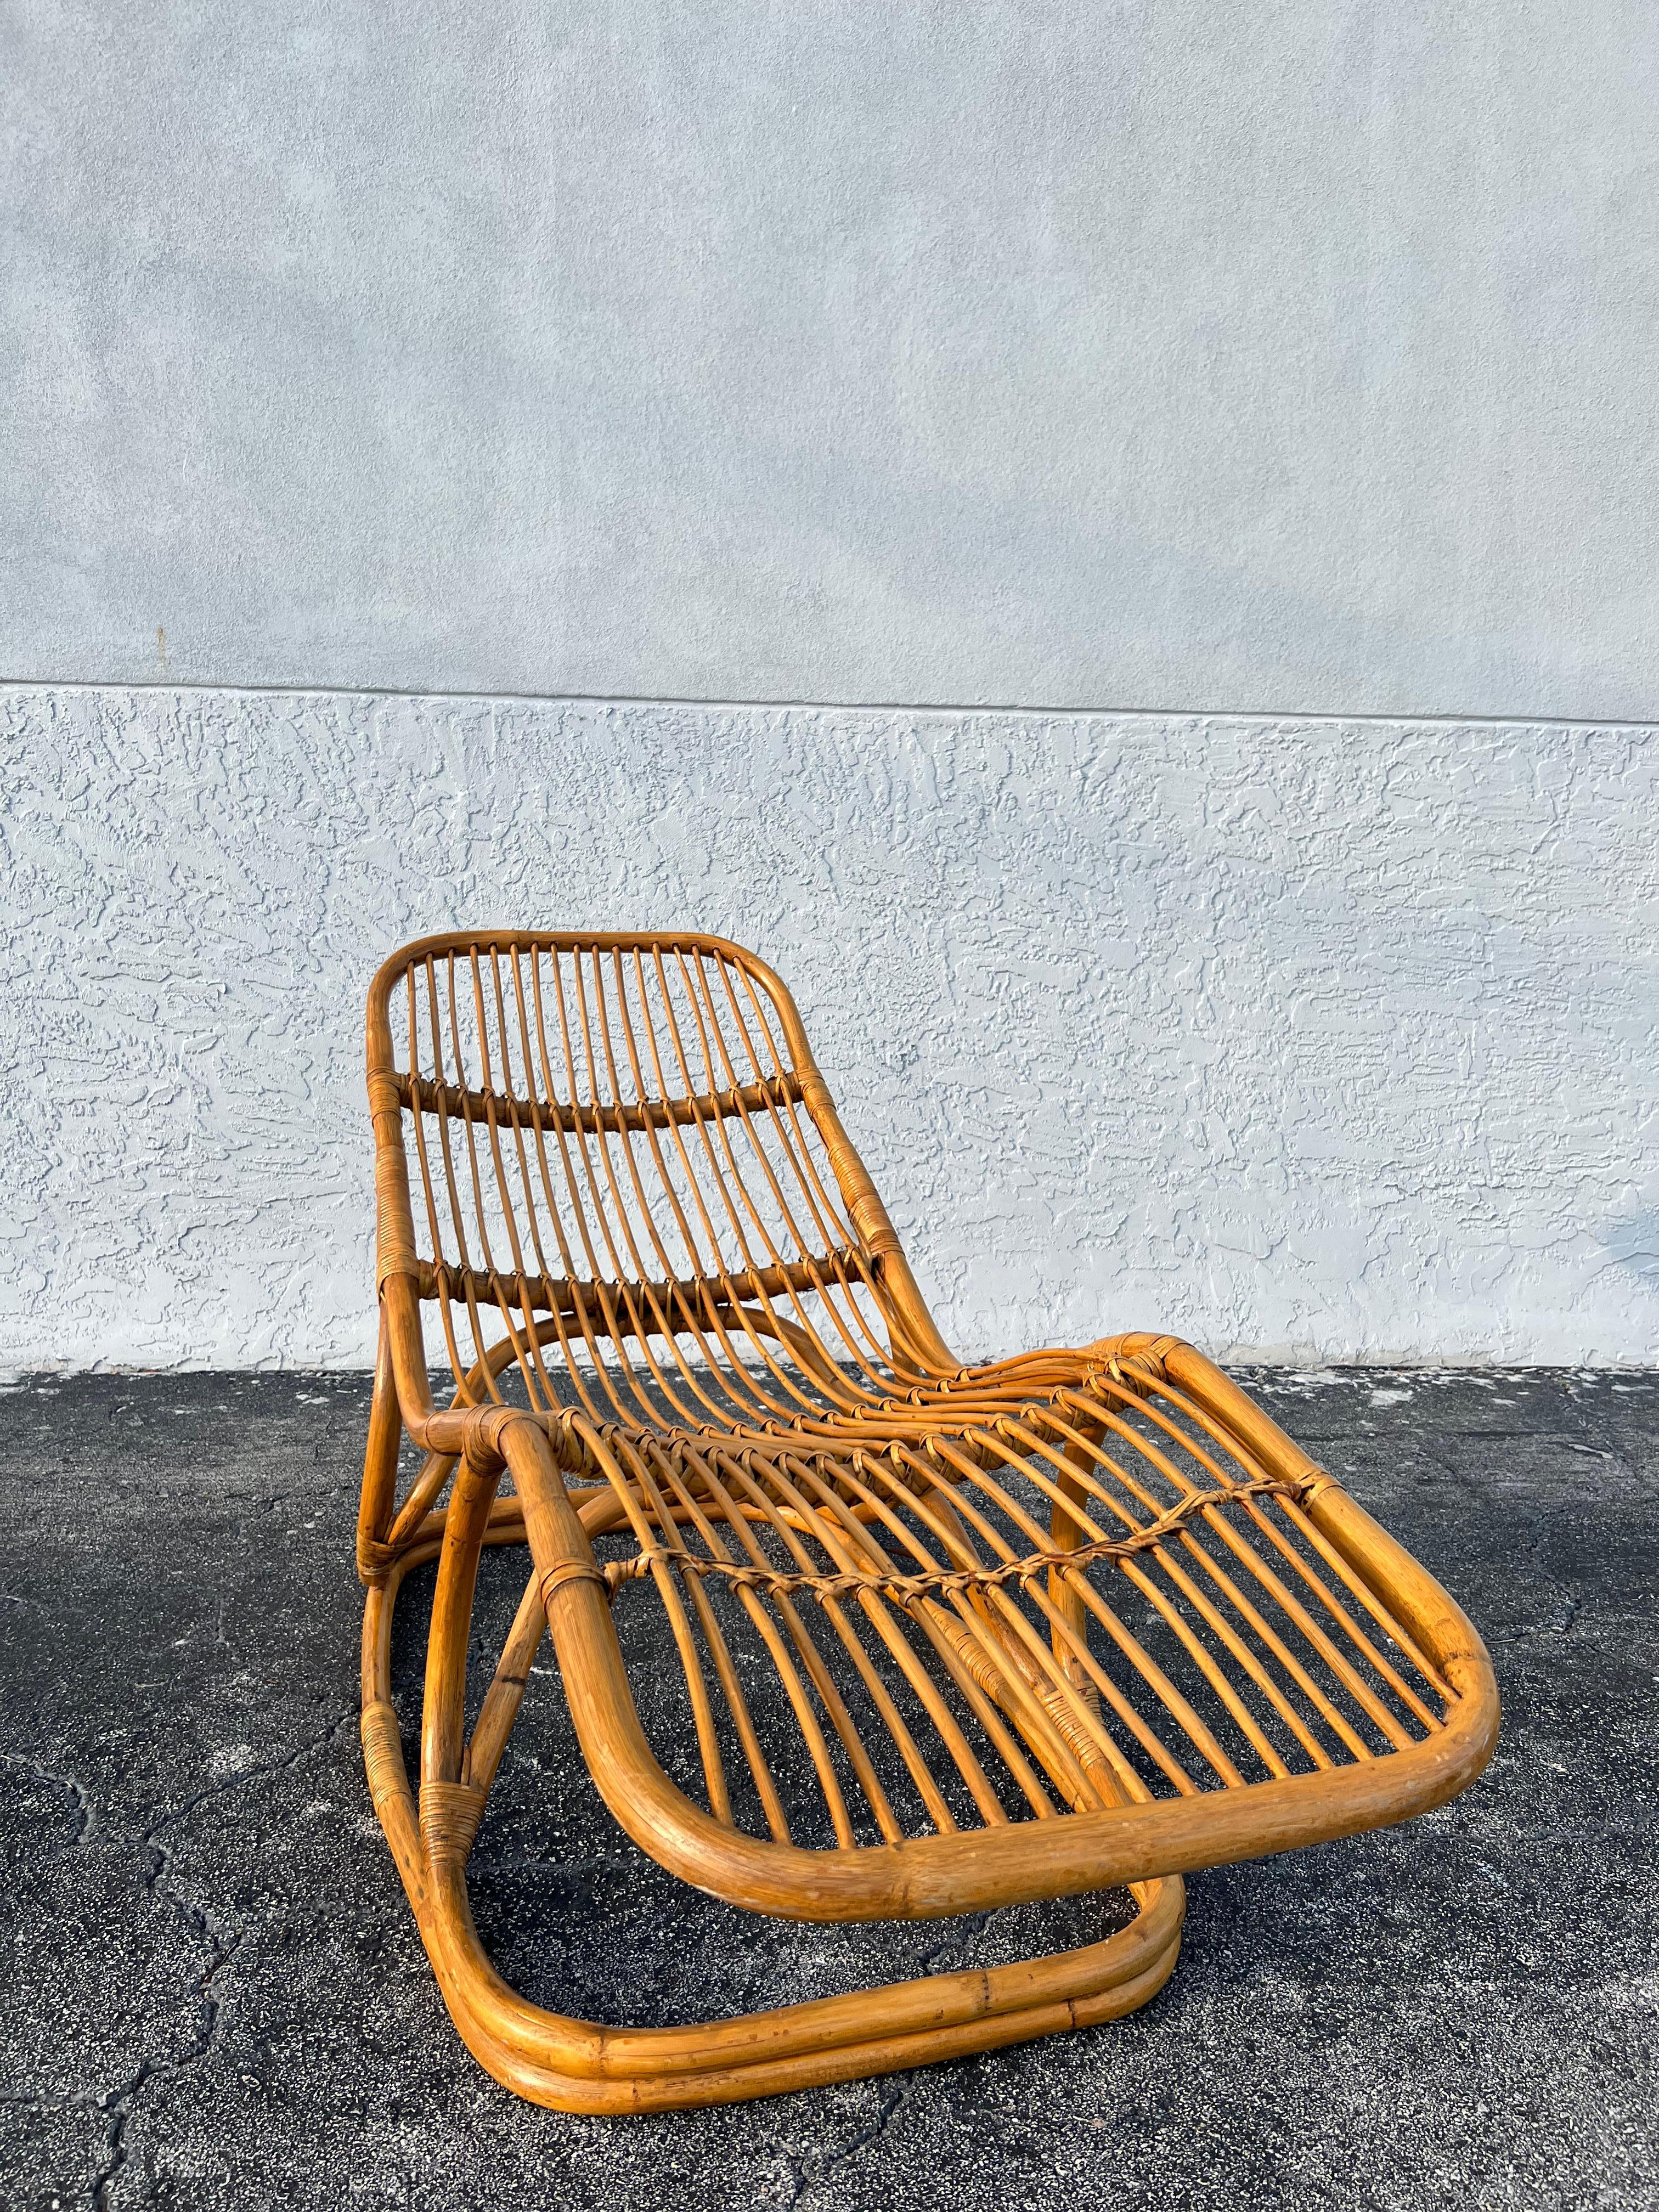 Tito Agnoli attributed rattan chaise lounge. One of a set of 2 that we are currently offering, this one in particular being in a slightly less reclined position. Cane wrapped portions are in tact with some wear to the finish (please refer to